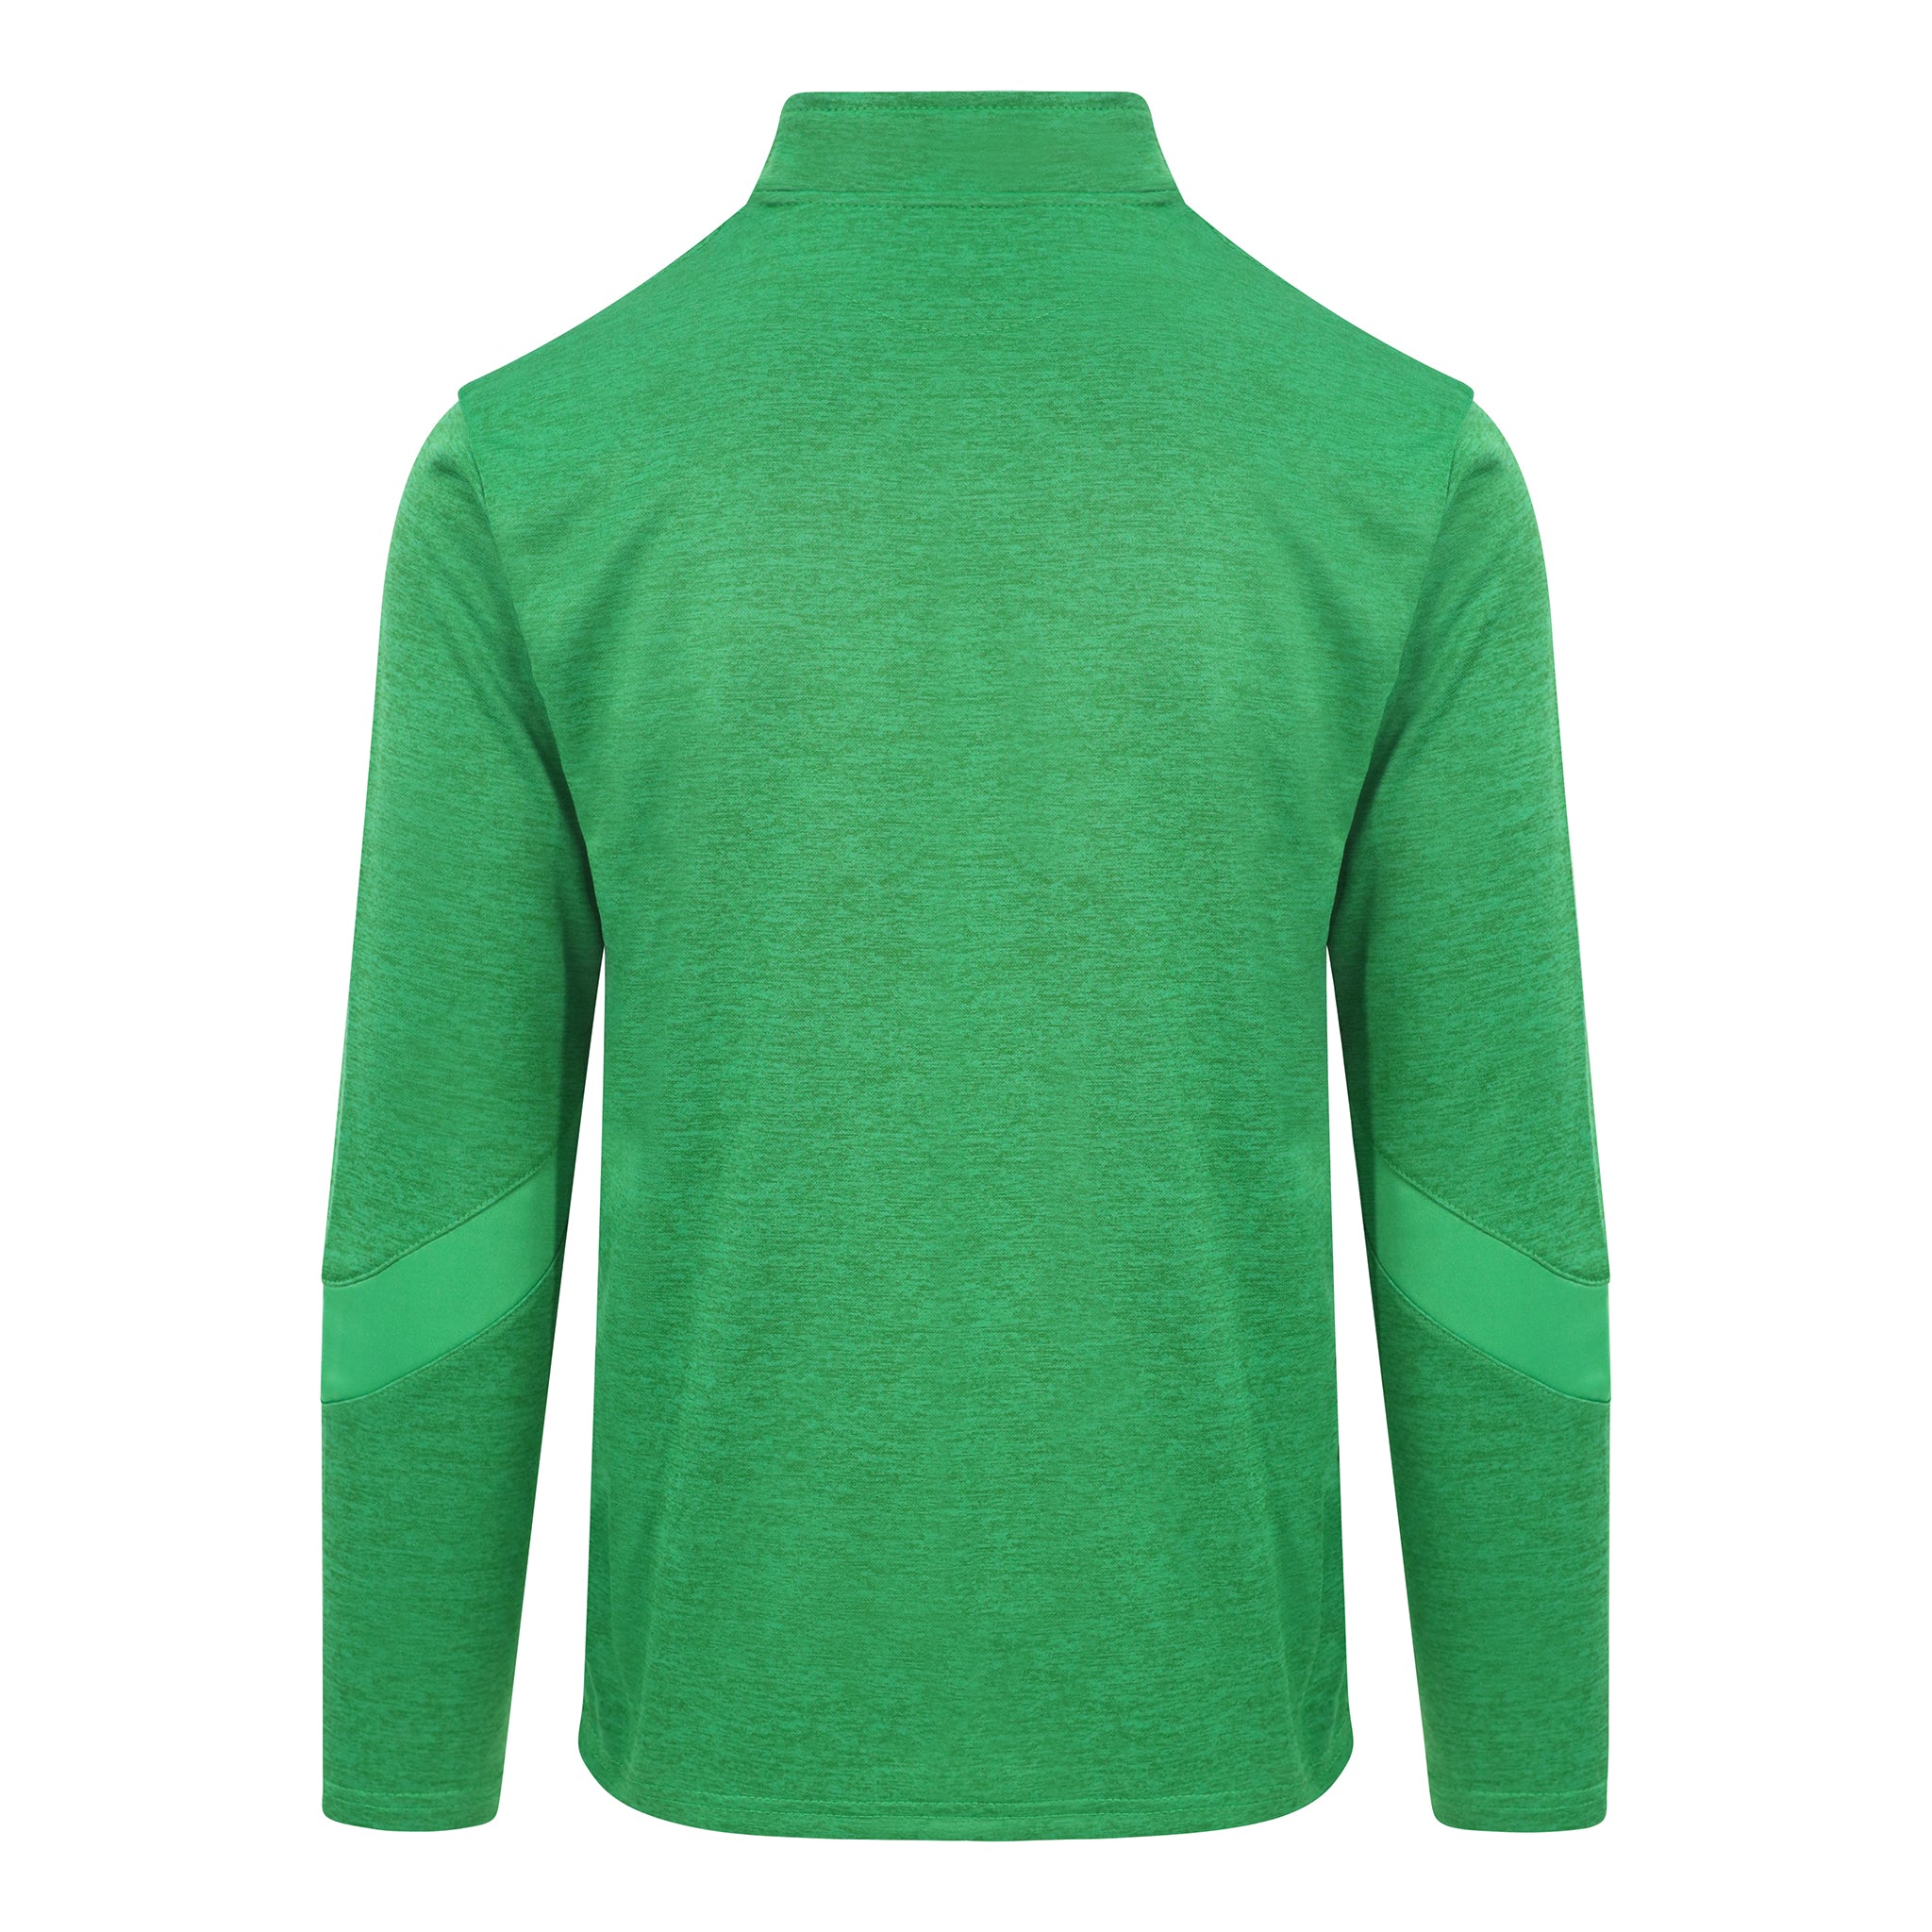 Mc Keever Core 22 1/4 Zip Top - Youth - Green